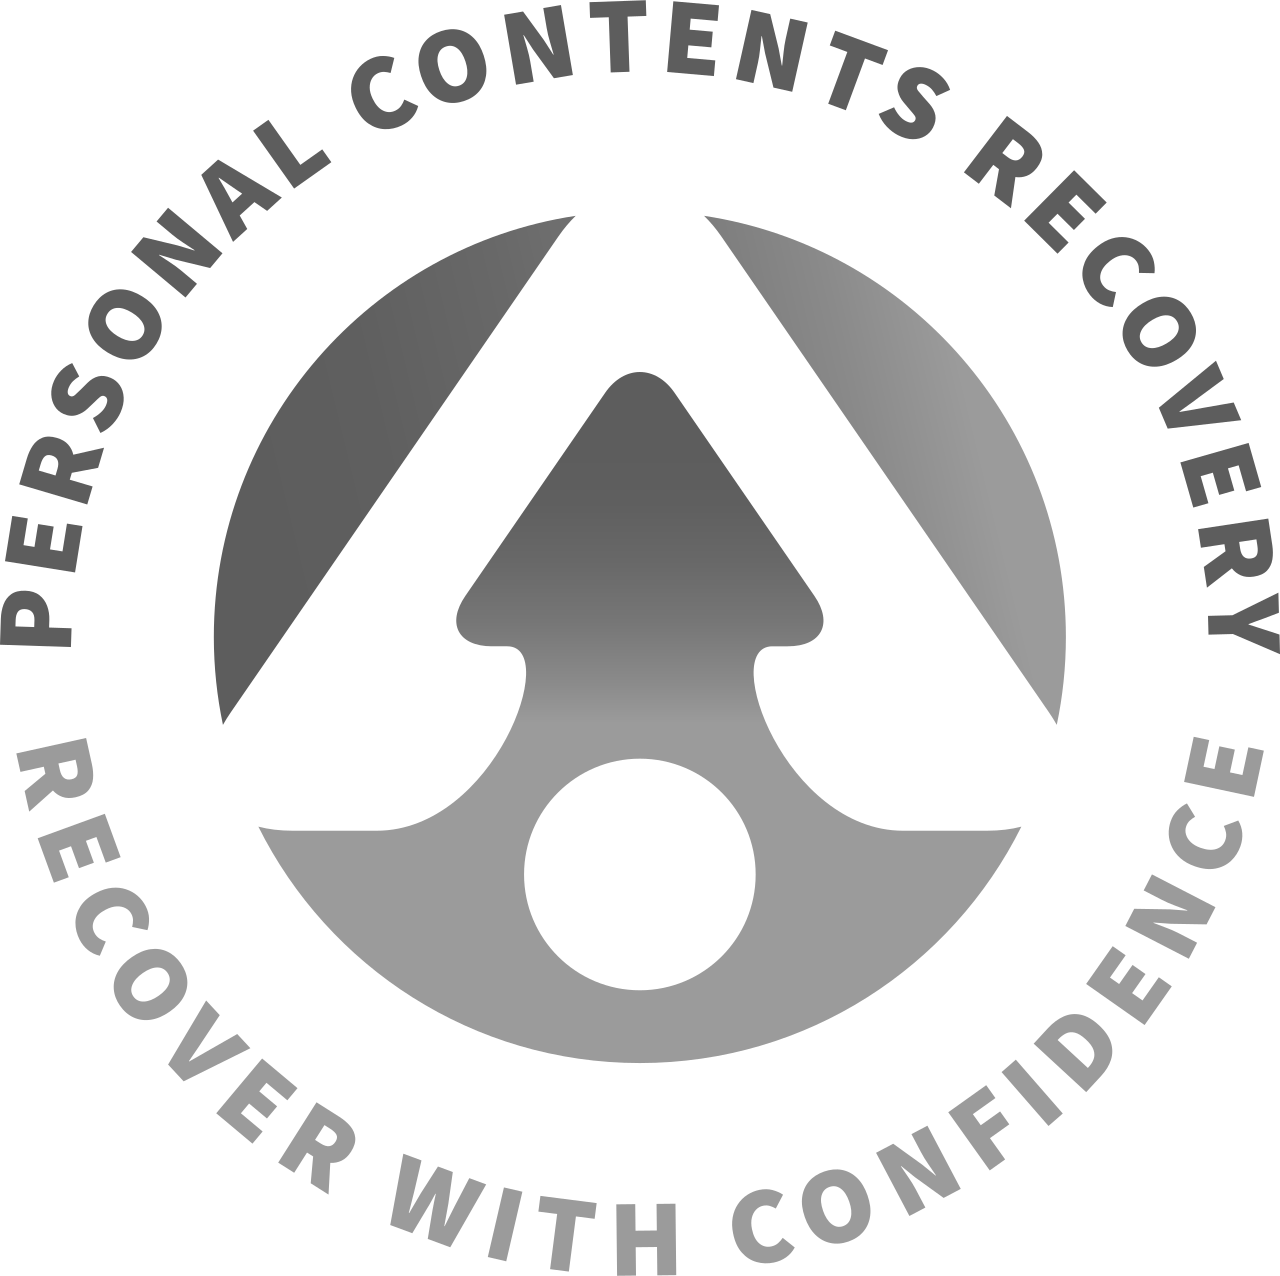 PERSONAL CONTENTS RECOVERY's logo